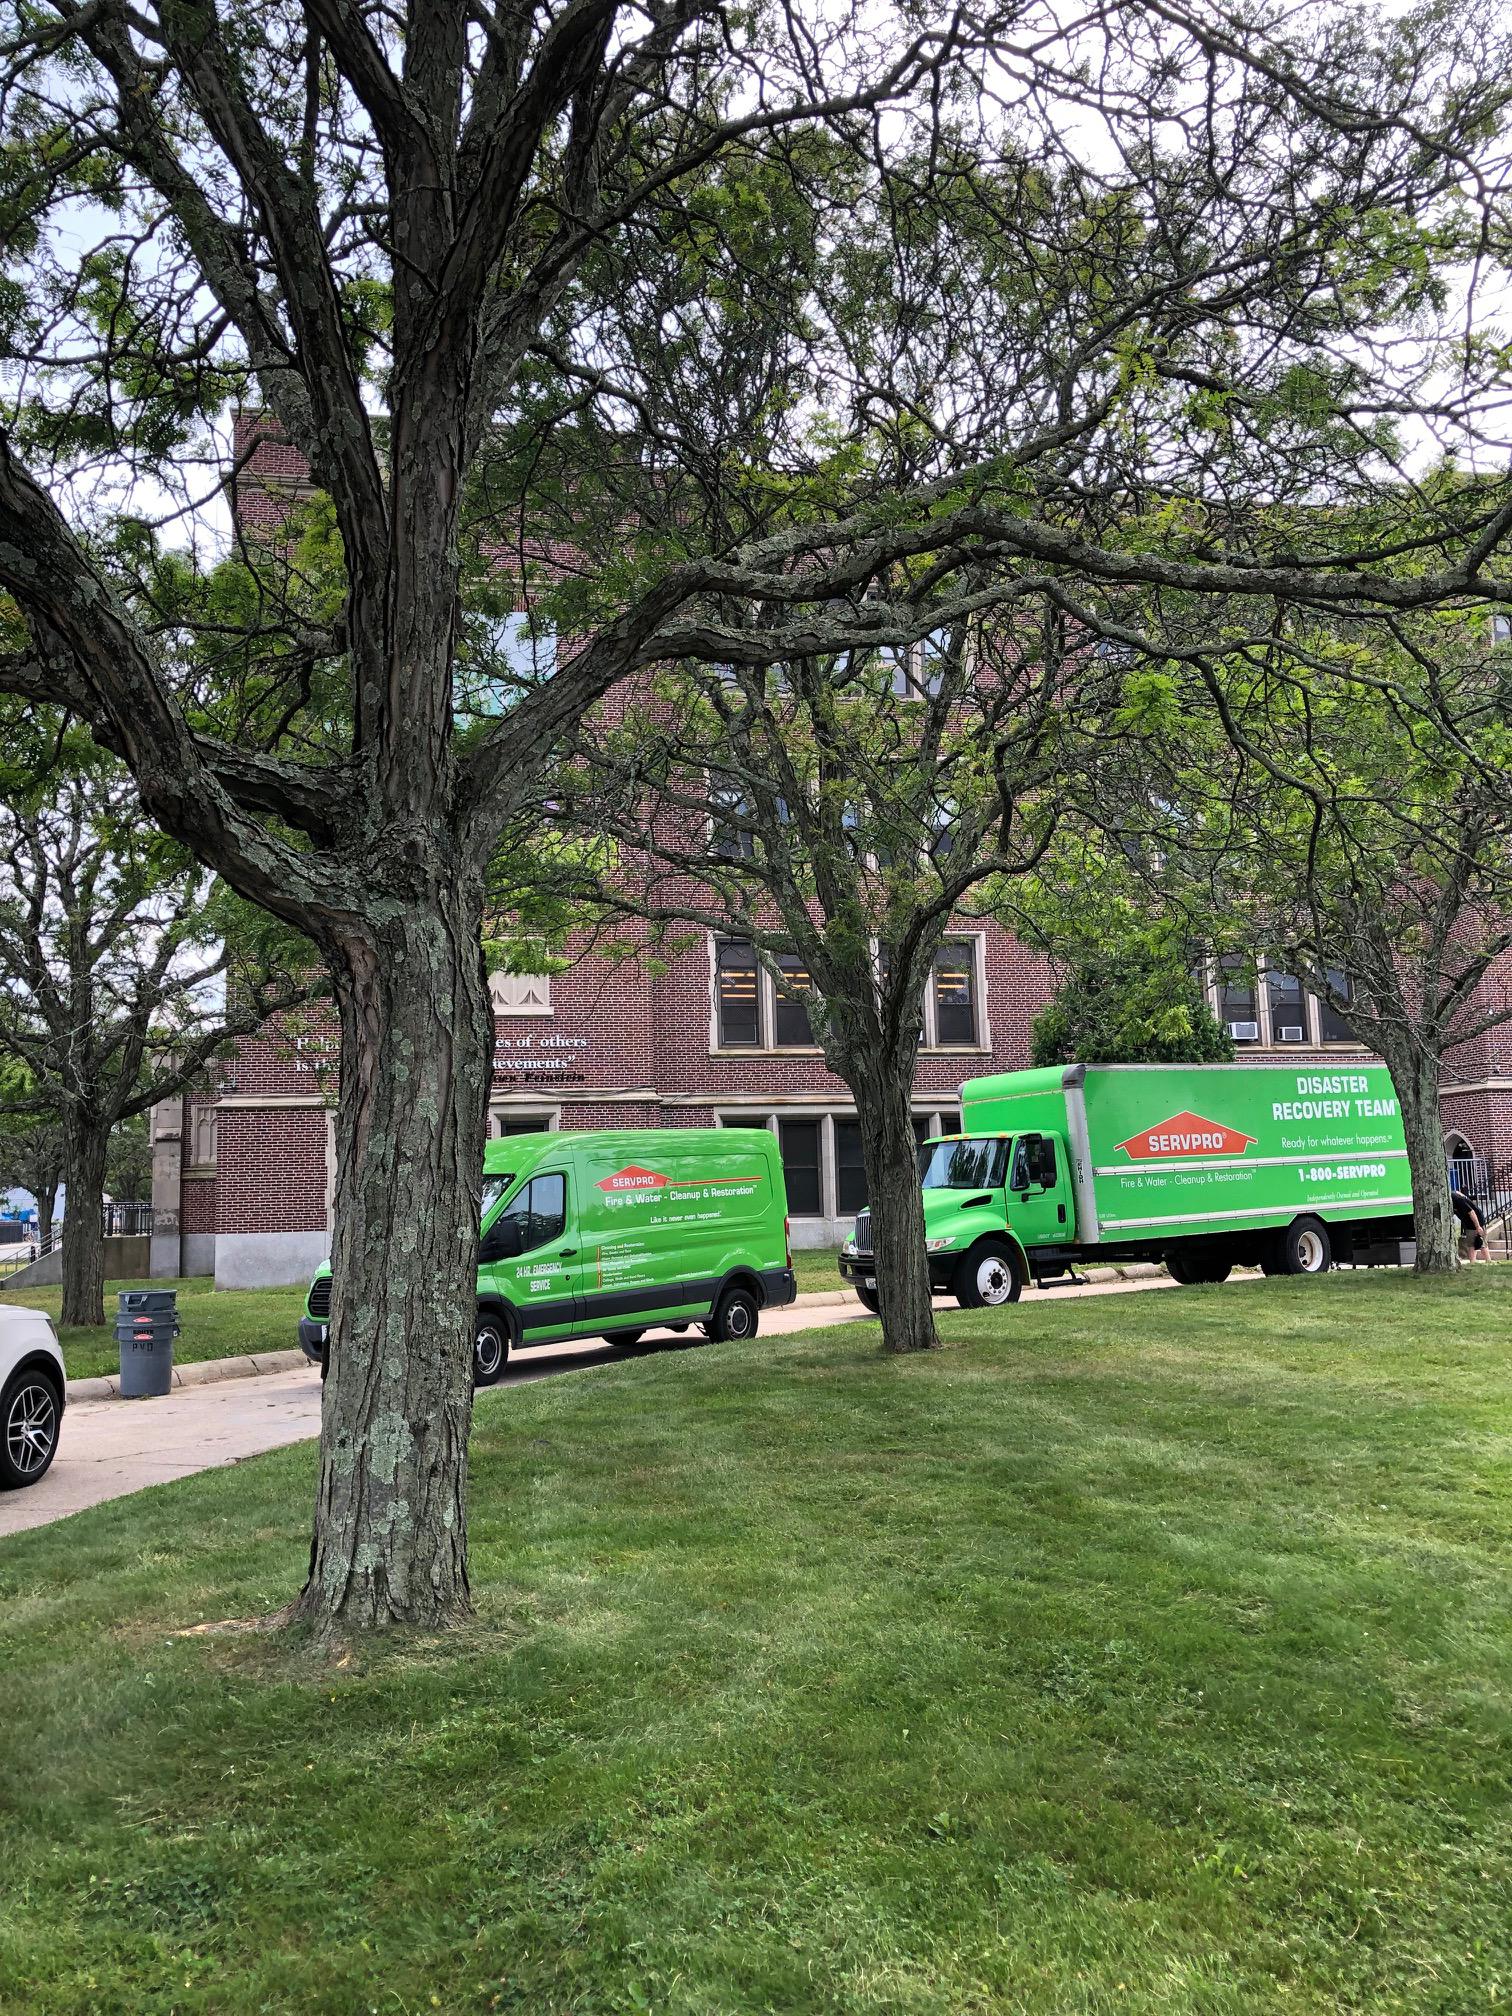 When you see those big green trucks you know who it is!